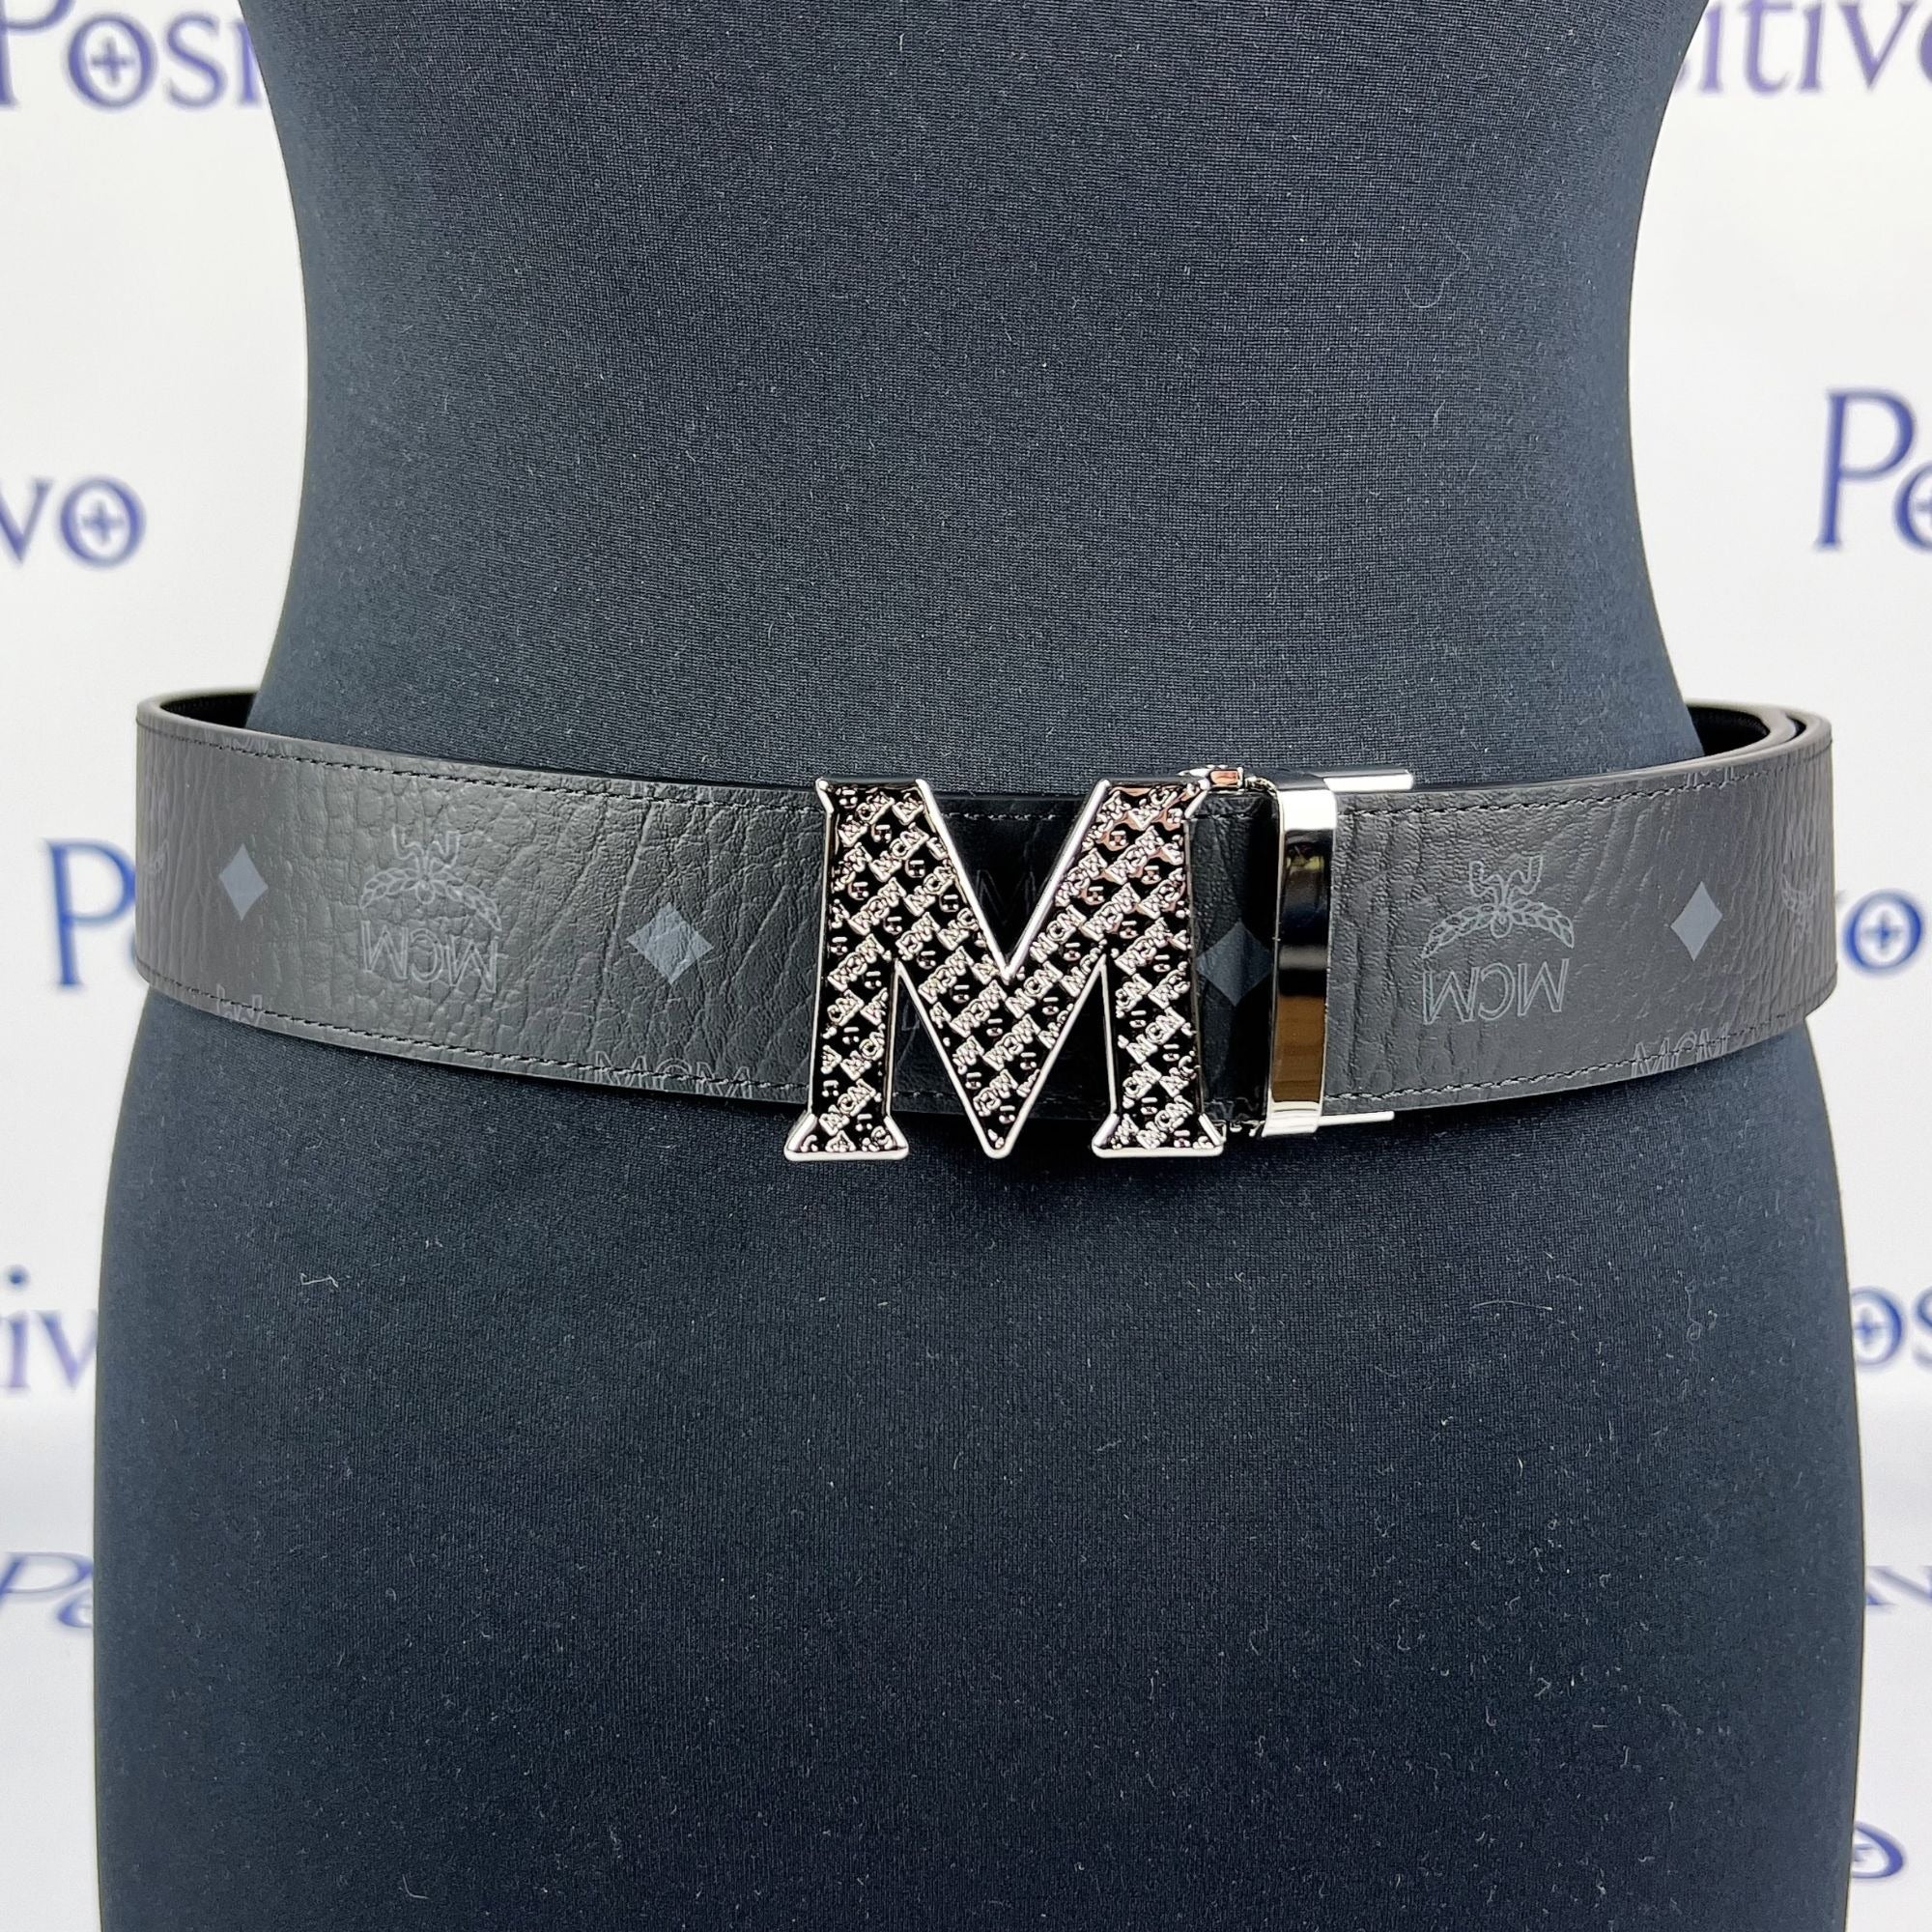 Mcm Logo Buckle Reversible Belt Candy Red